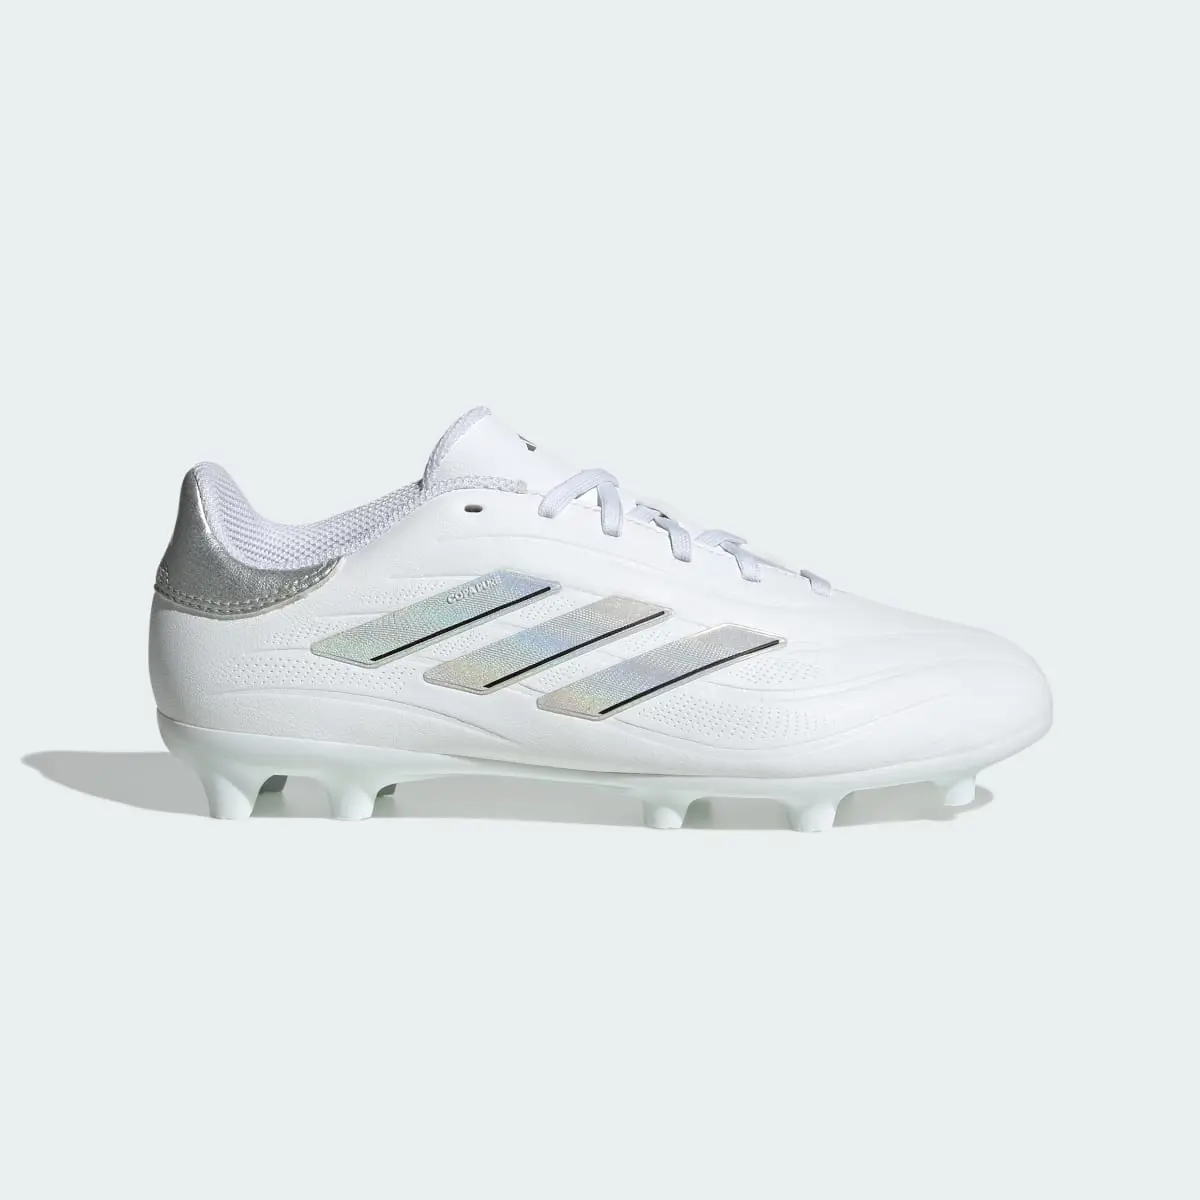 Adidas Copa Pure II League Firm Ground Boots. 2